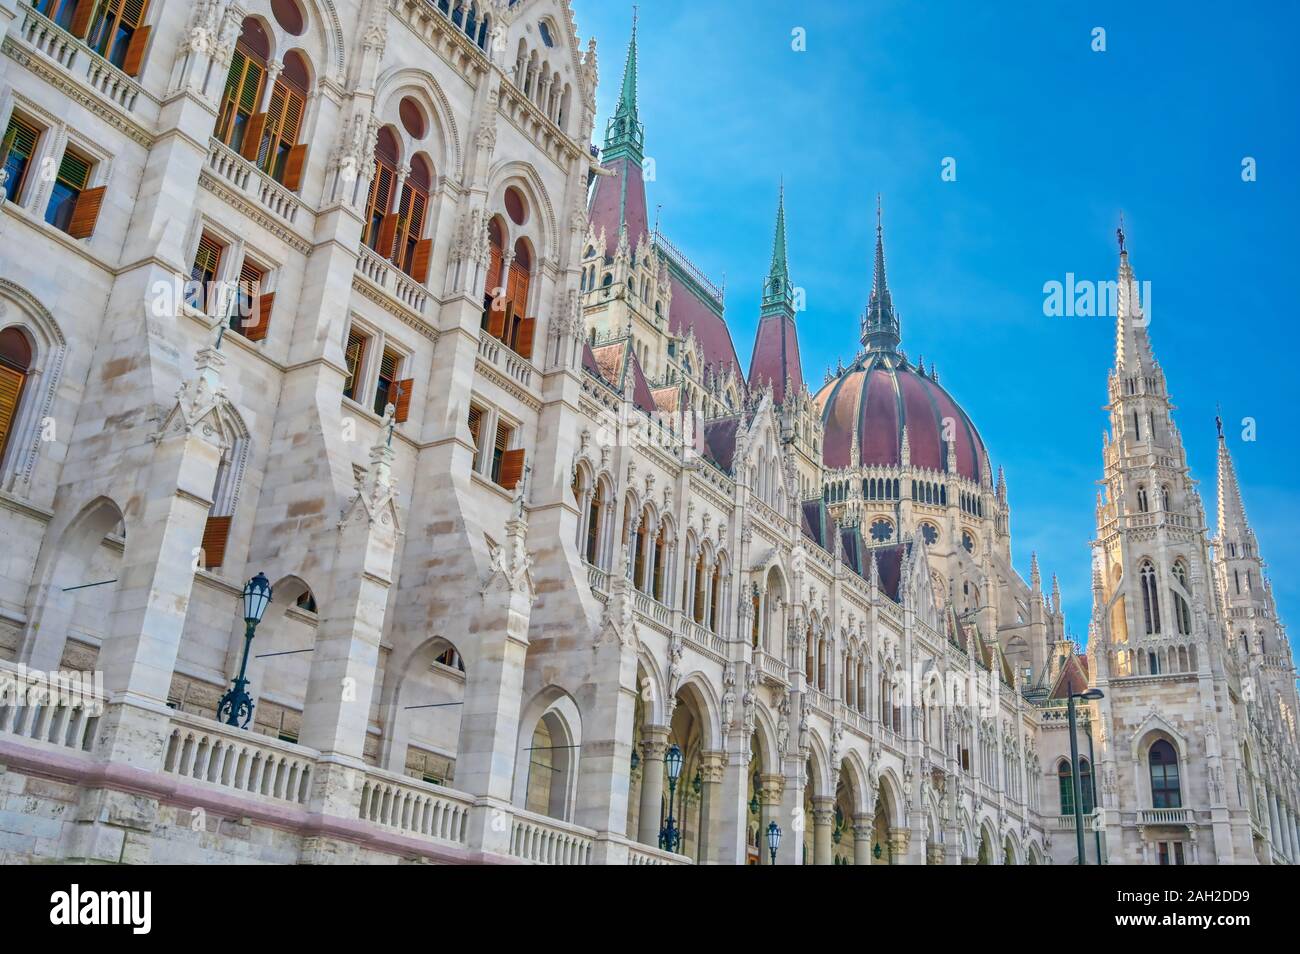 The exterior of the Hungarian Parliament Building in Budapest, Hungary. Stock Photo